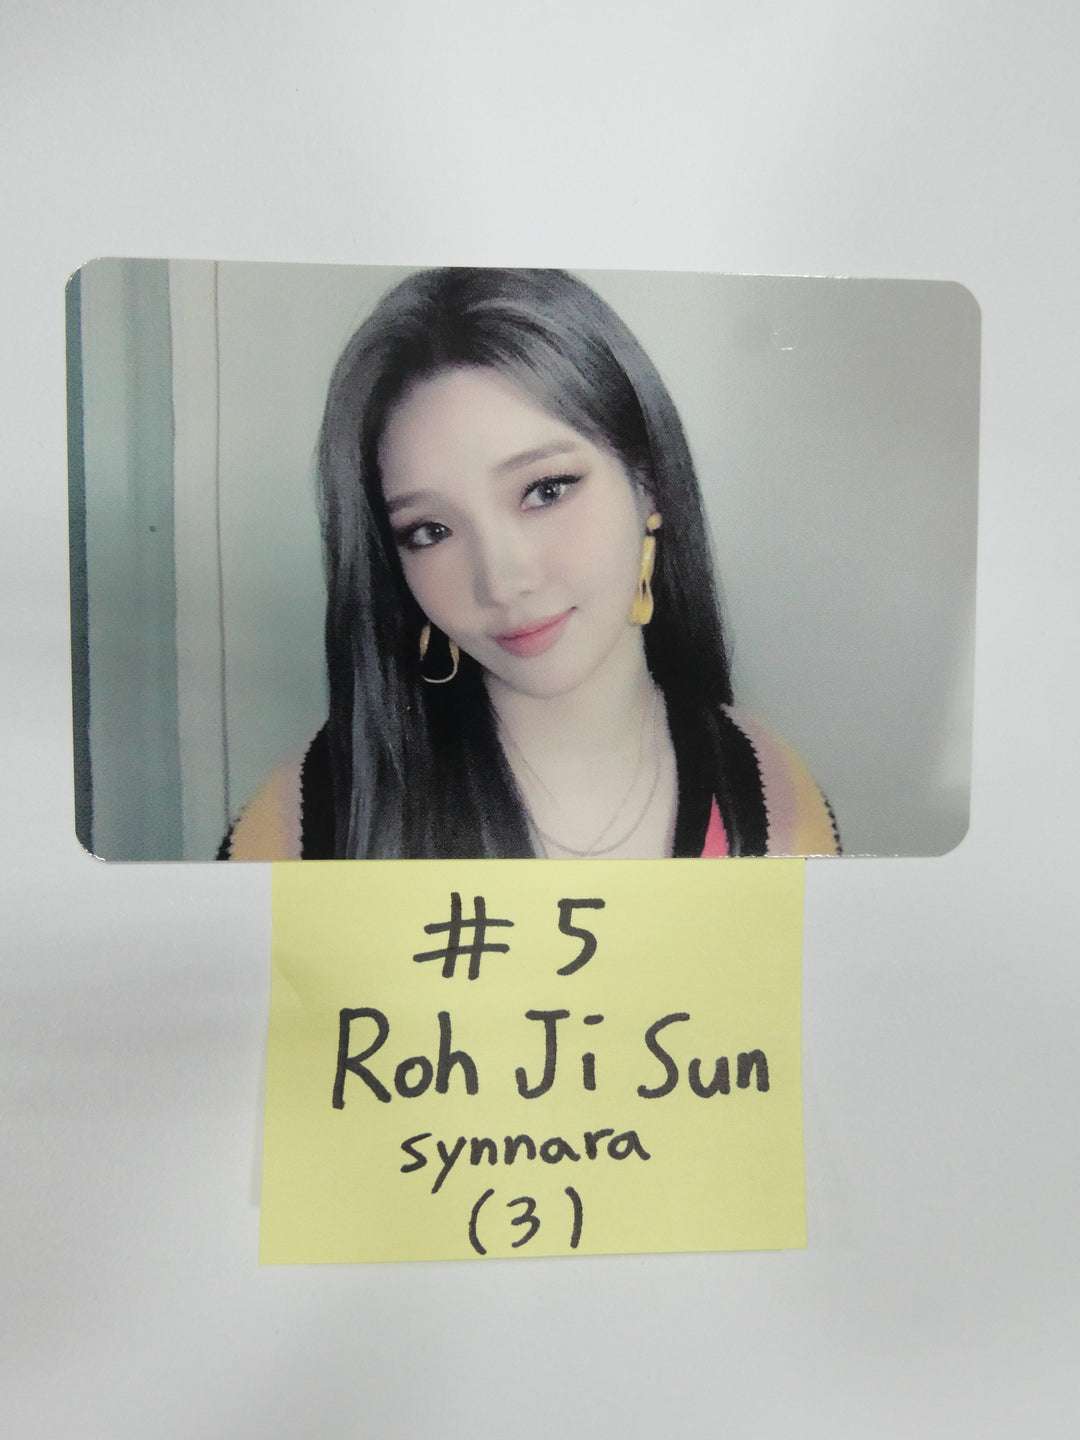 Fromis_9 "9 Way Ticket" - Synnara Pre-order Benefit Photocard (updated 5-20)